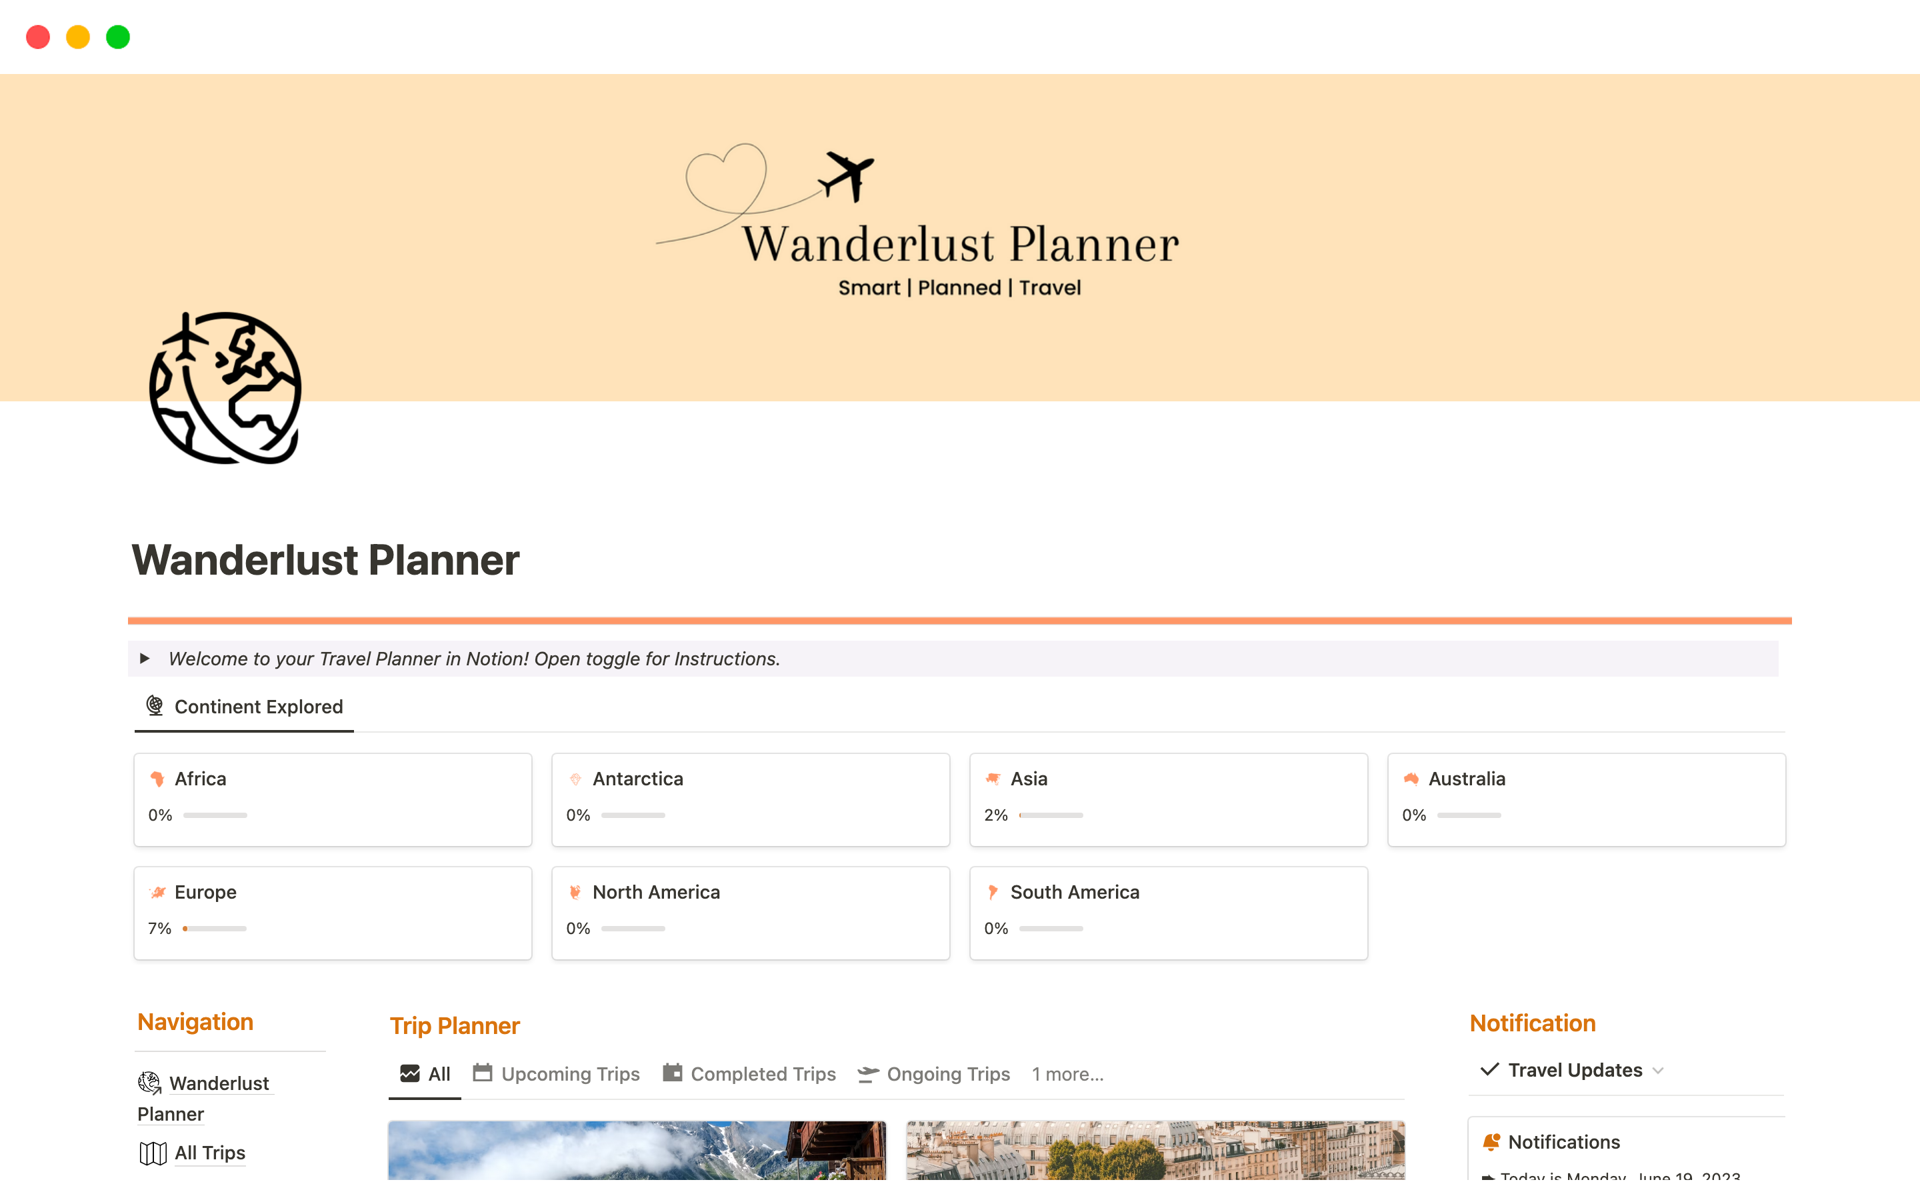 The Ultimate travel planner which has all the things around travel planning a person would ever need along with achievement mode.